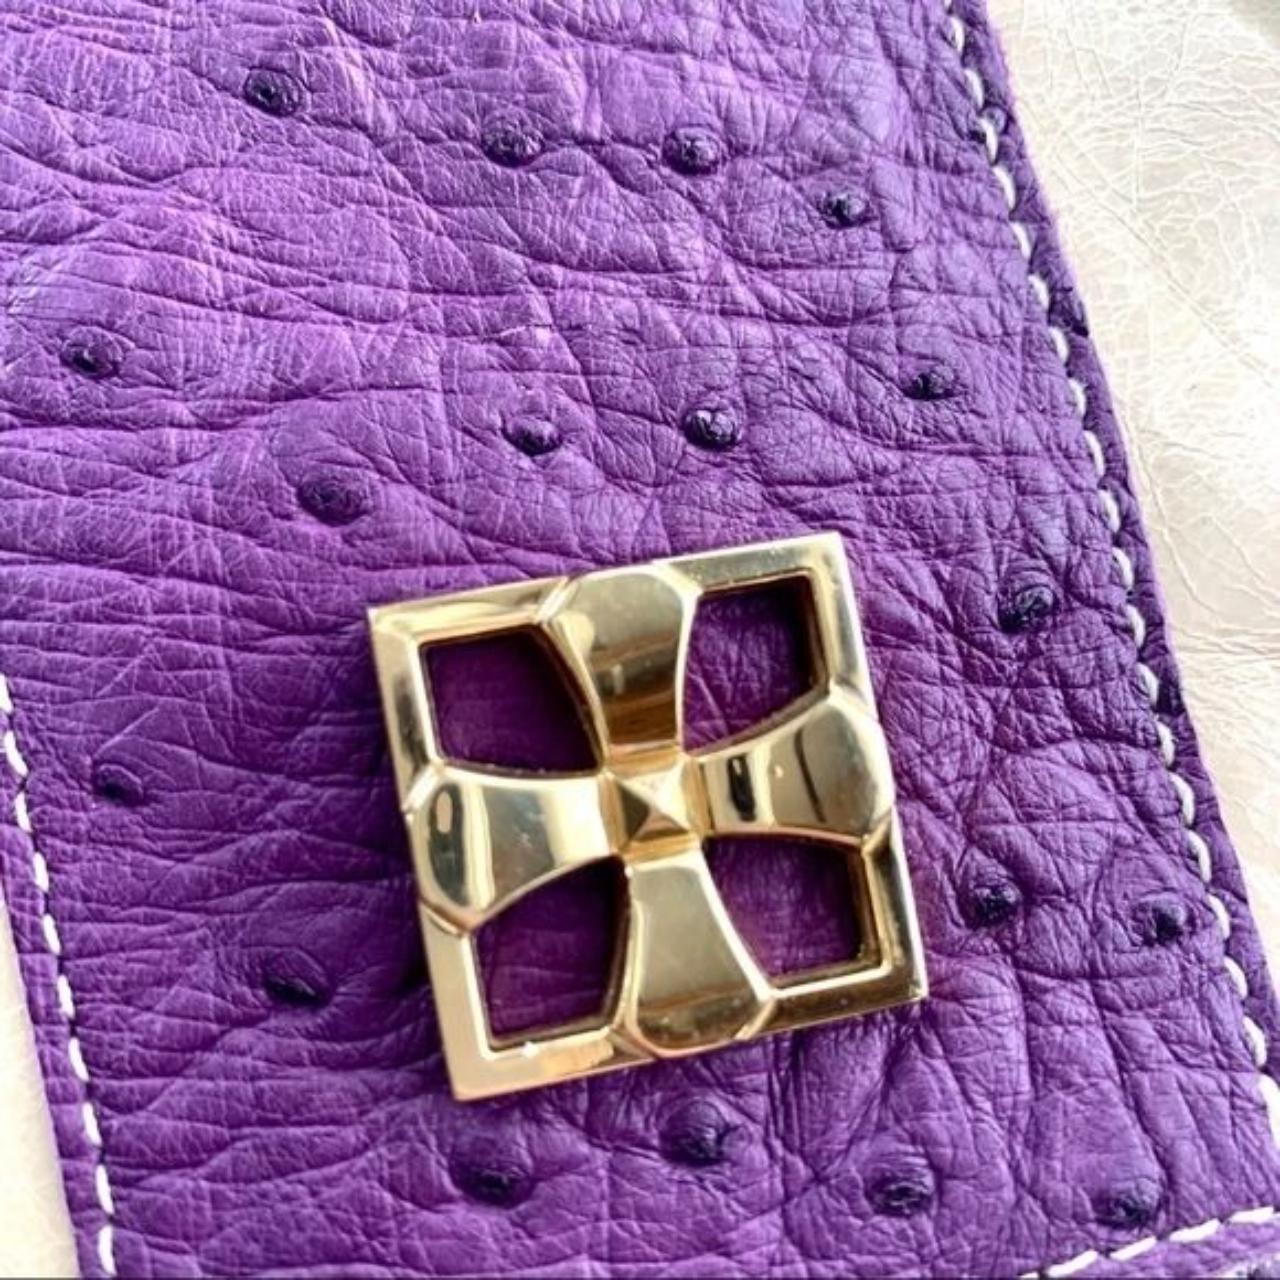 Product Image 2 - Post- Luxury Accessories Leather Clutch

Soft